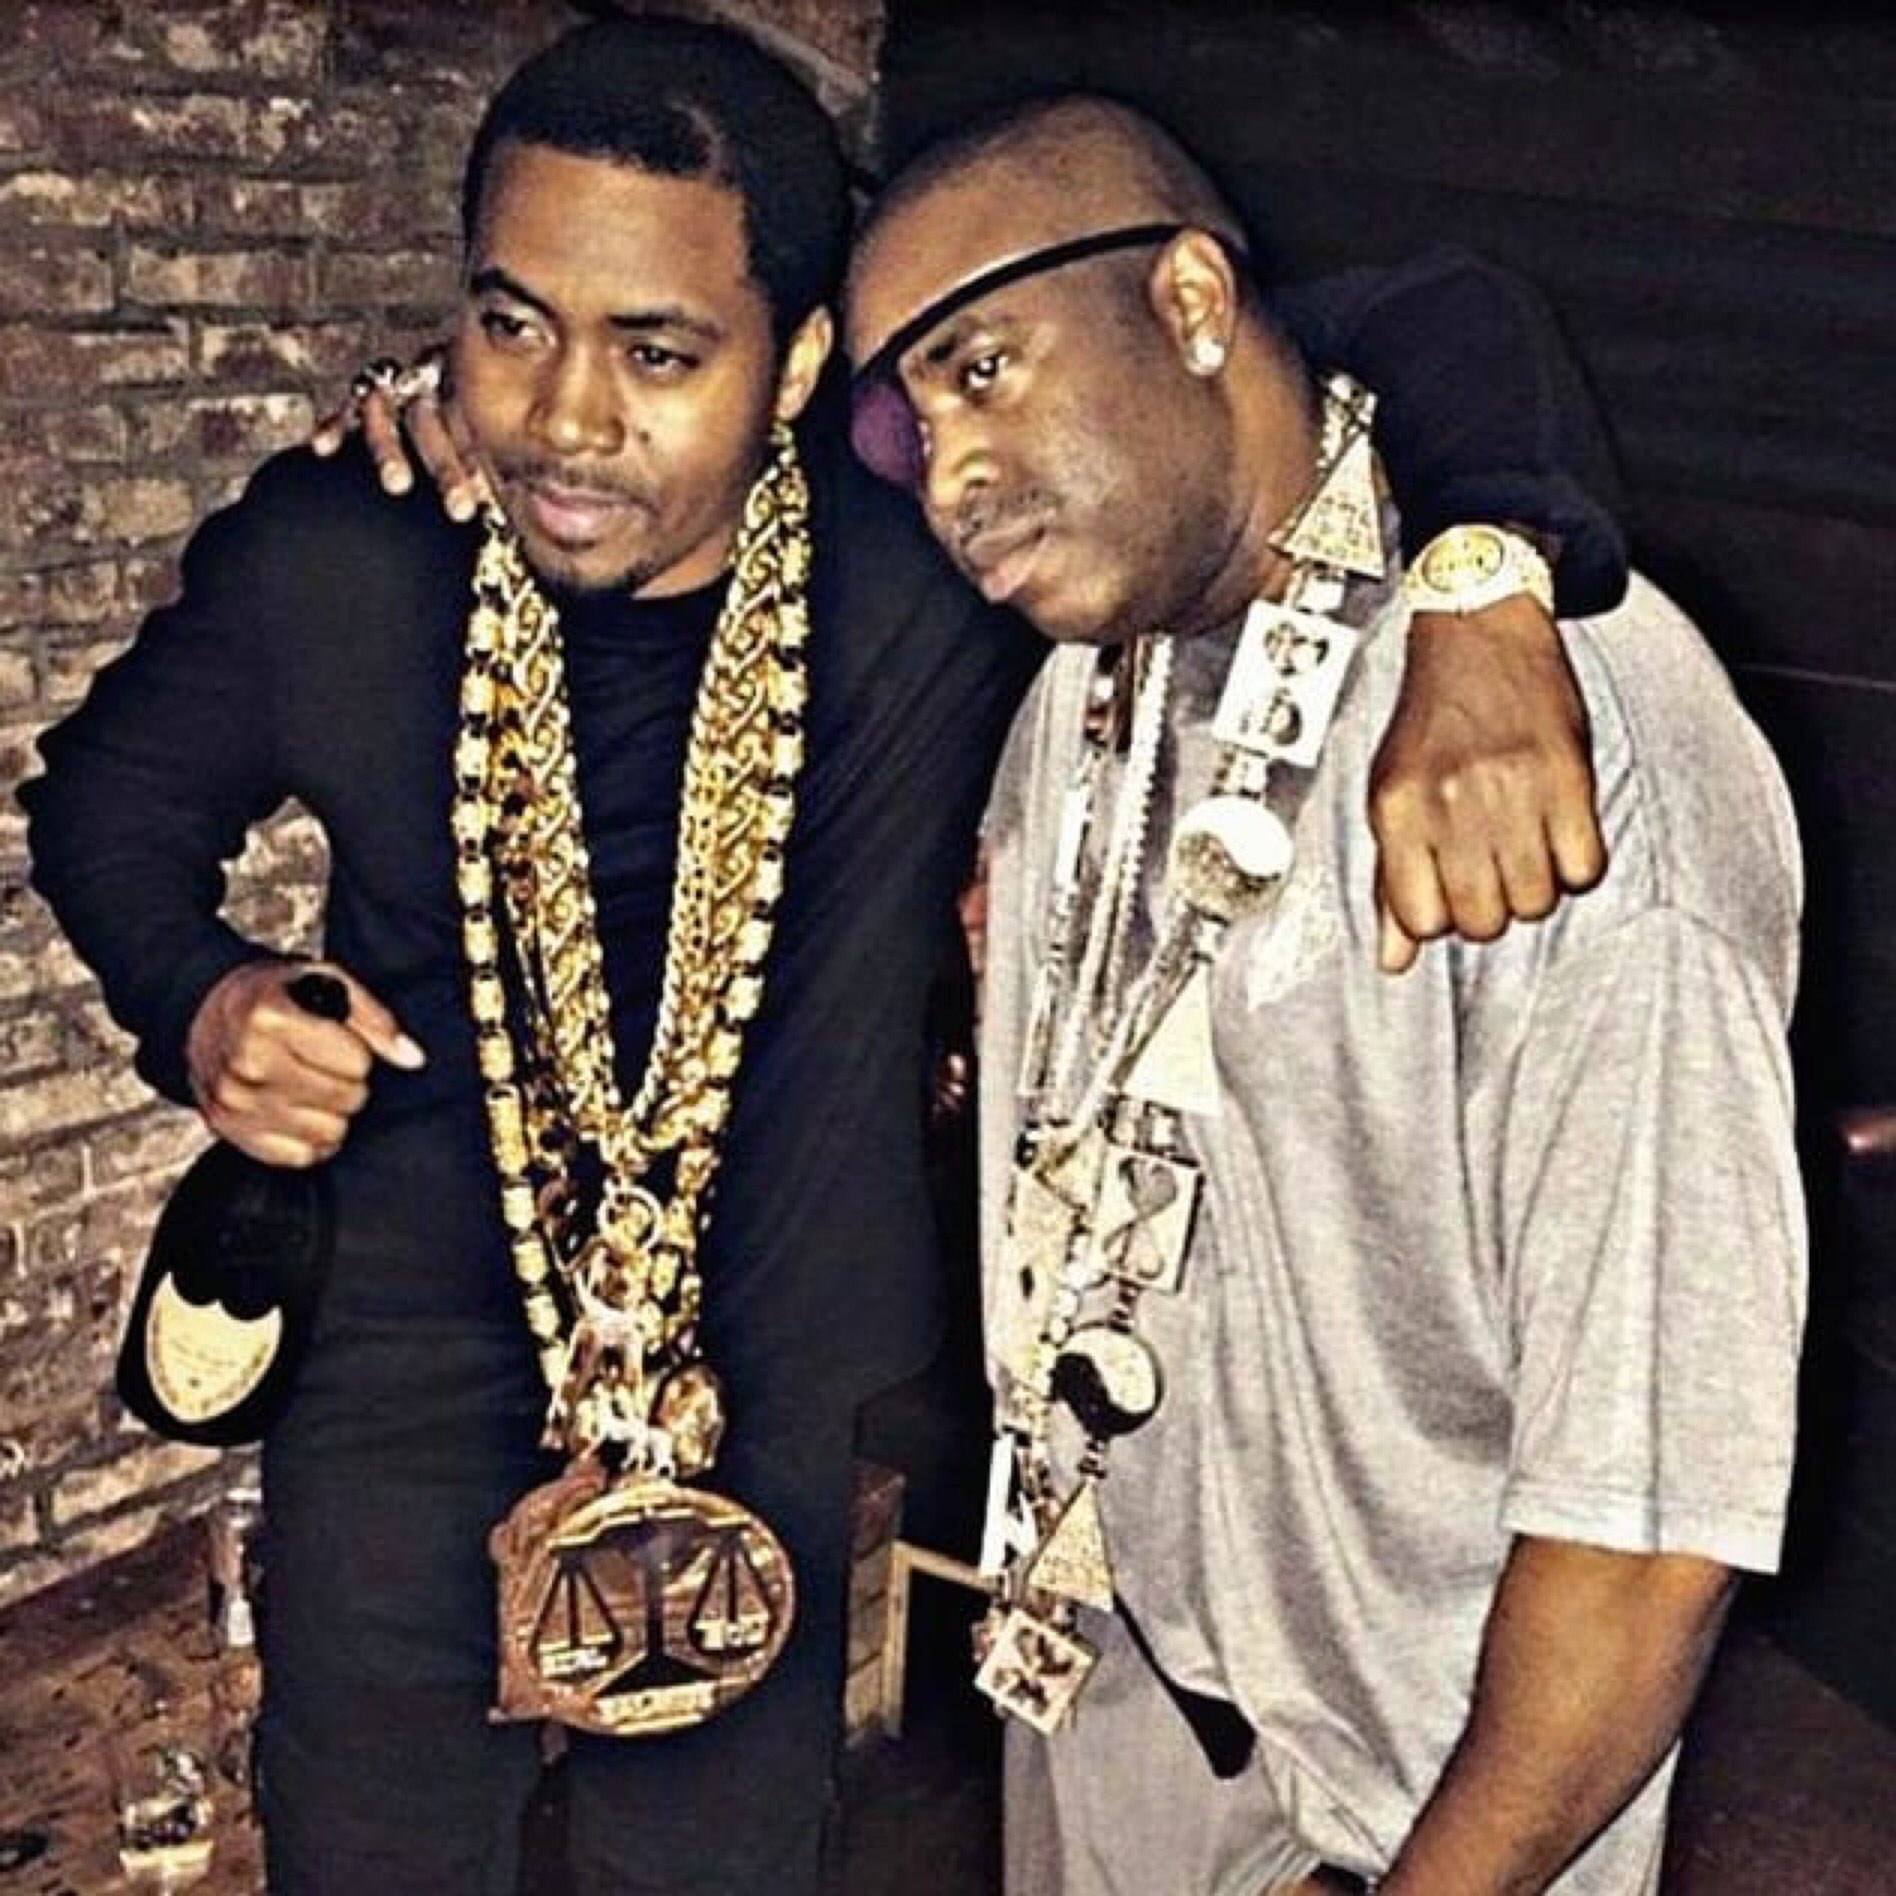 Slick Rick - ‪Linked up with Def Jam and NTWRK to create